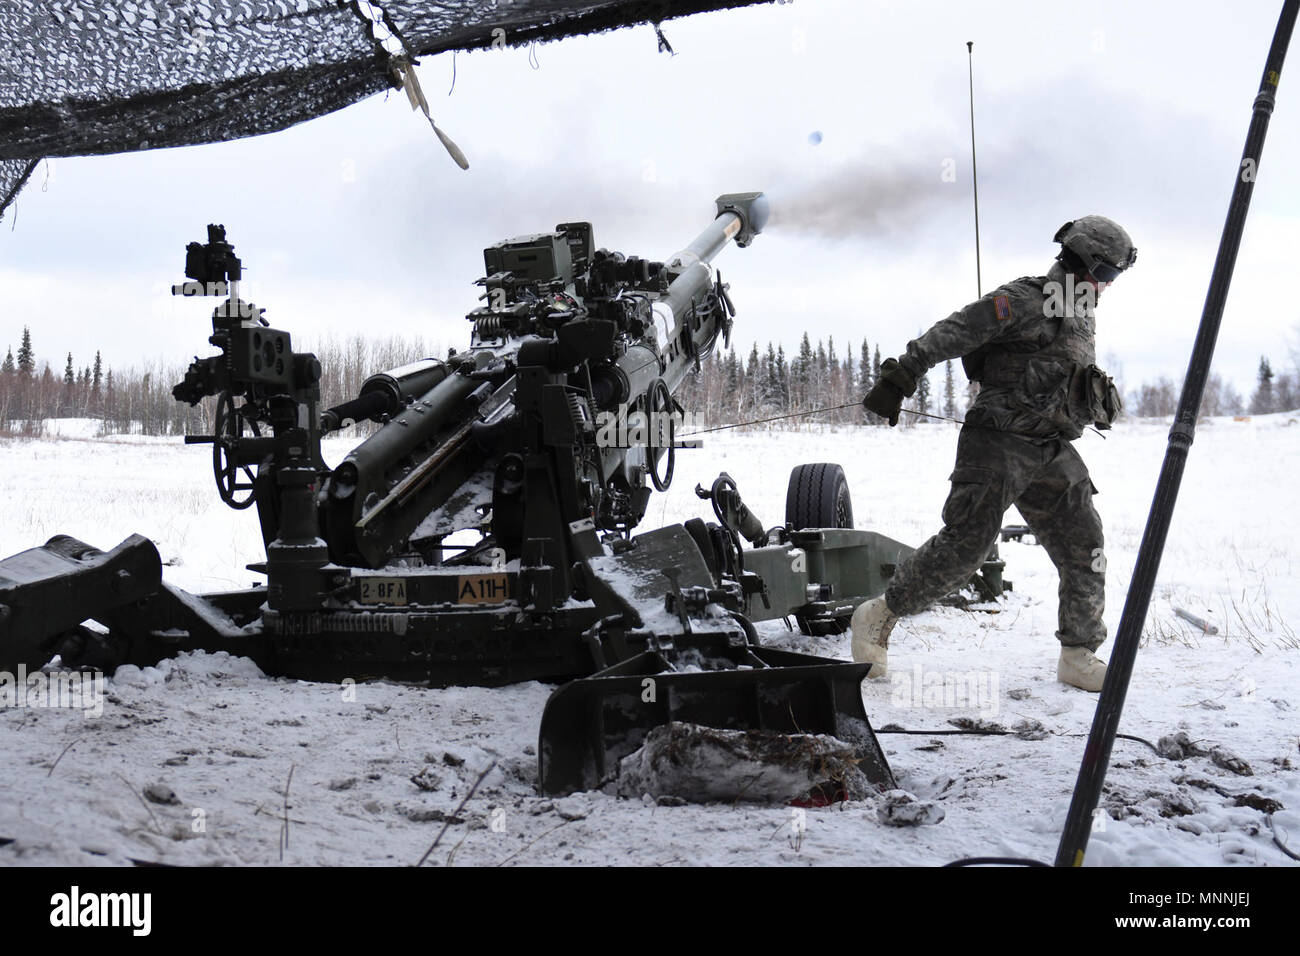 A Soldier assigned to 1st Stryker Brigade Combat Team, 25th Infantry Division, 2nd Battalion, 8th Field Artillery Regiment fires a M777 155mm Howitzer March 15 during a live fire training exercise at Fort Greely, Alaska, as part of the U.S. Army Alaska-led Joint Force Land Component Command in support of Alaskan Command's exercise Arctic Edge 18 conducted under the authority of U.S. Northern Command. Arctic Edge 2018 is a biennial, large-scale, joint-training exercise that prepares and tests the U.S. military's ability to operate tactically in the extreme cold-weather conditions found in Arcti Stock Photo